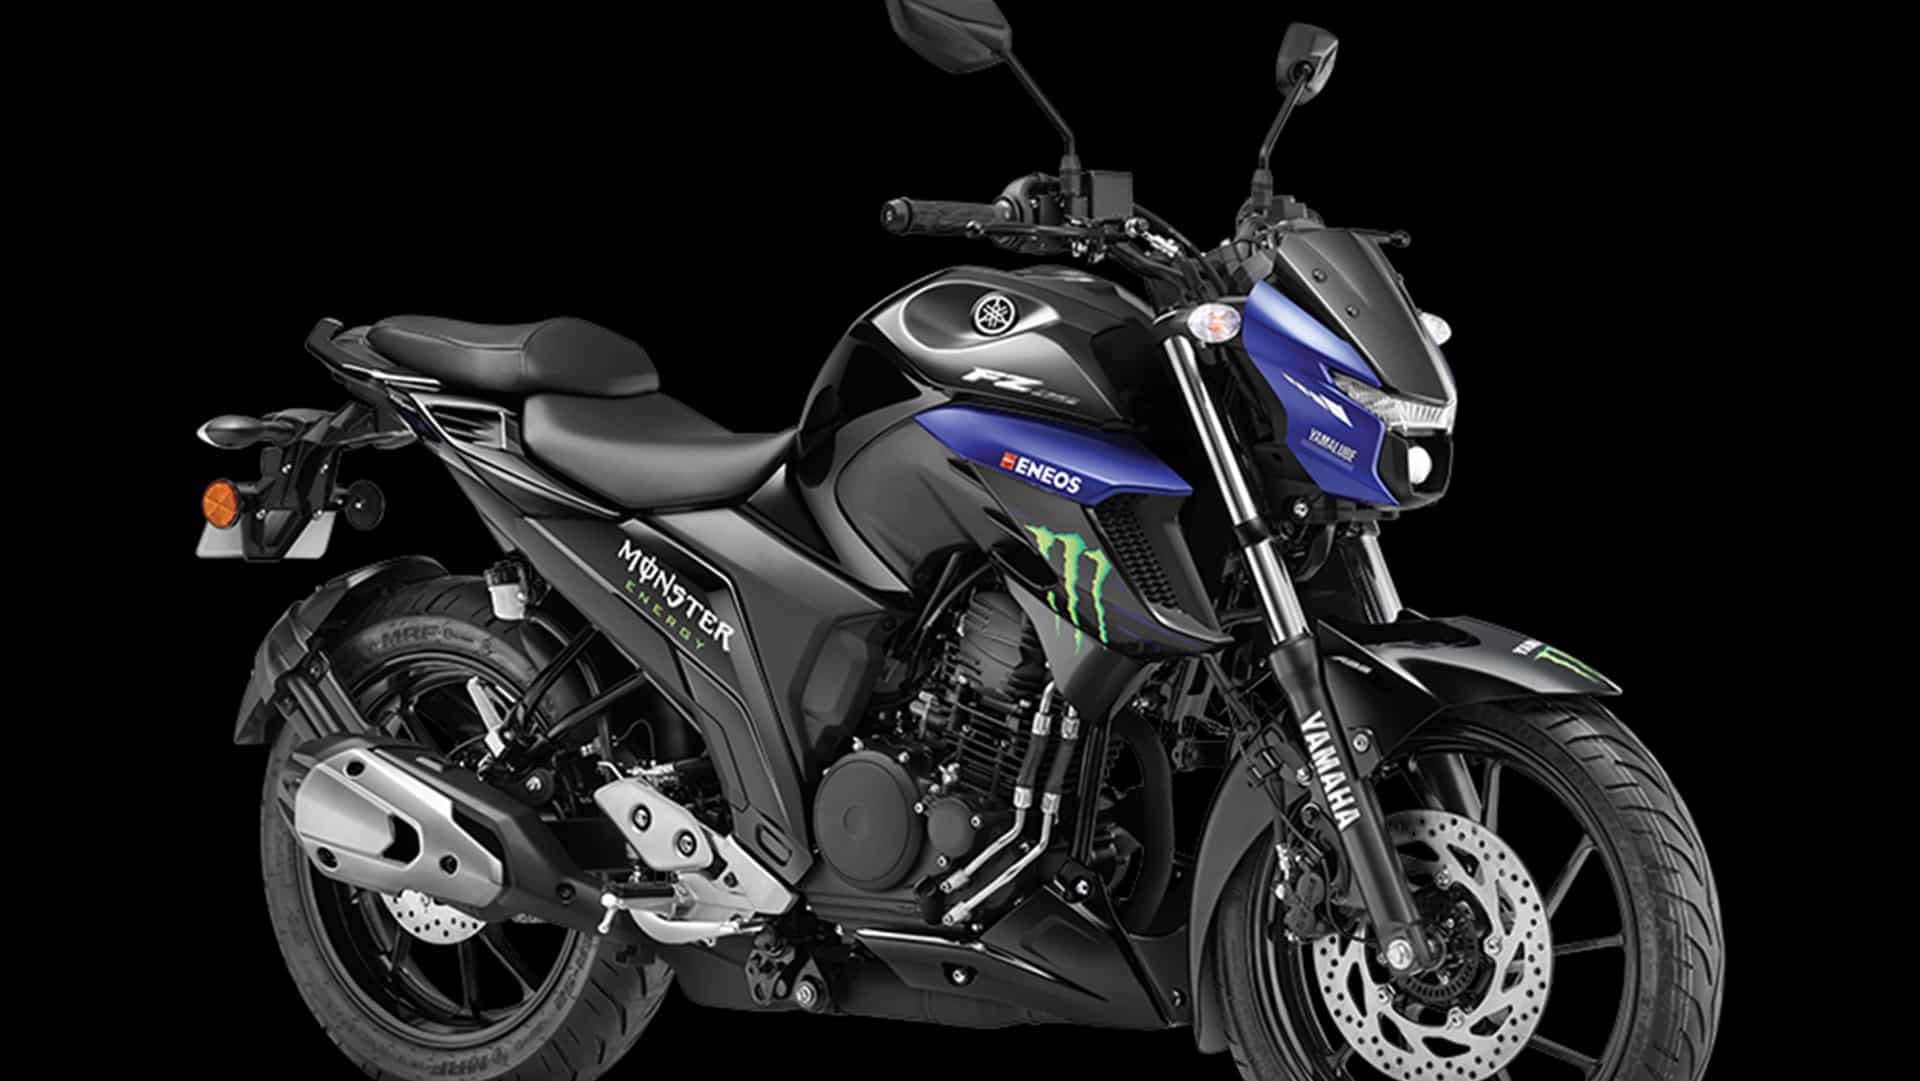 Yamaha FZ25 Monster Energy Moto GP Edition launched in India